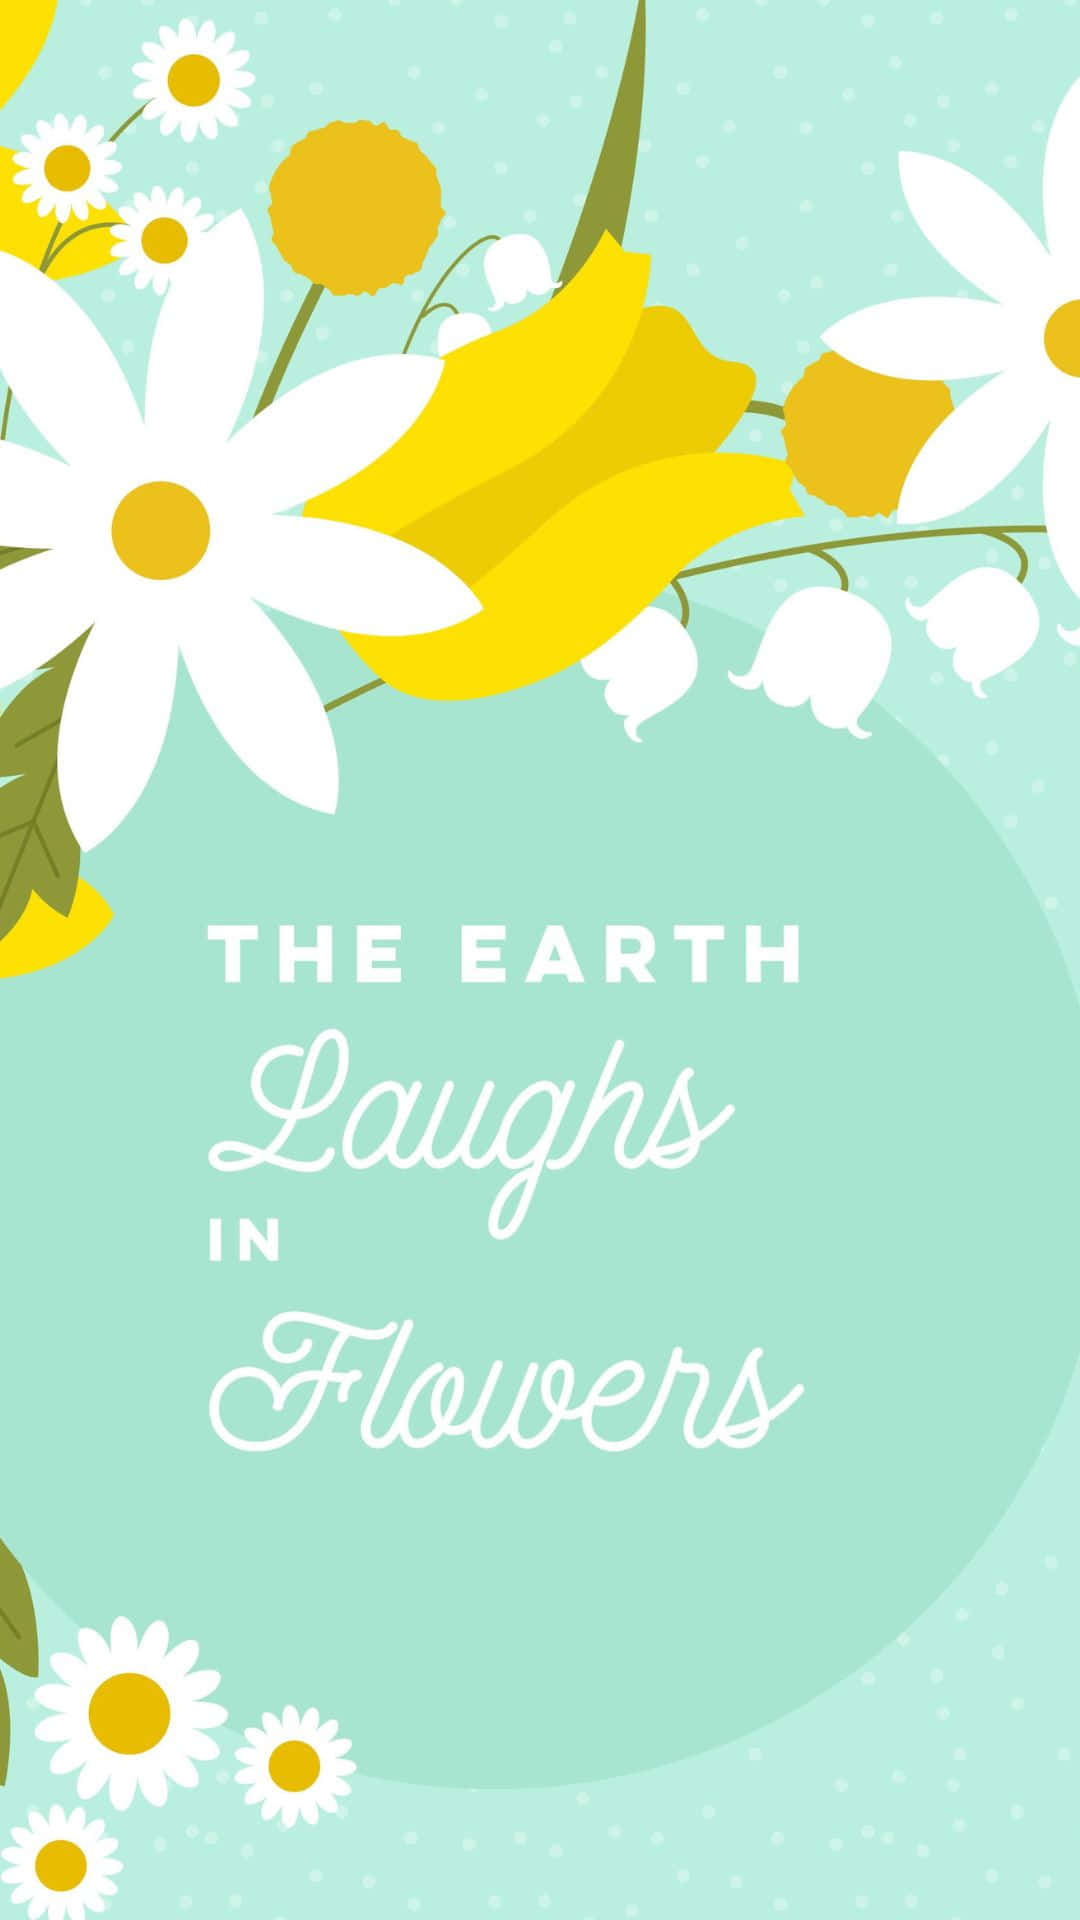 The Earth Laughs In Flowers